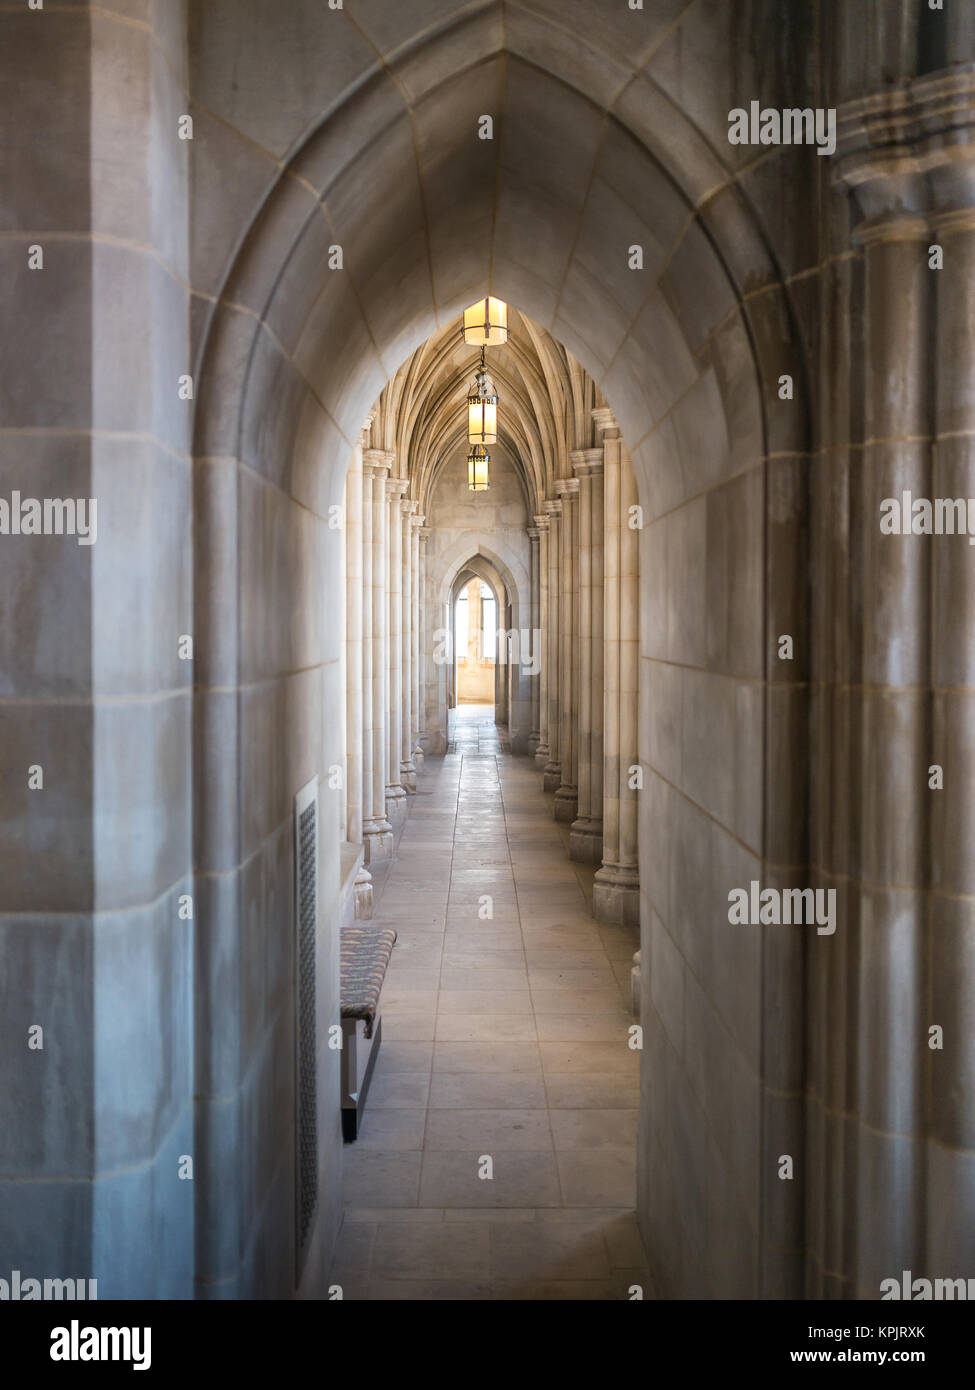 Interior of the Washington National Cathedral in a sunny day. The cathedral is an Episcopal Church located in Washington, D.C. Stock Photo